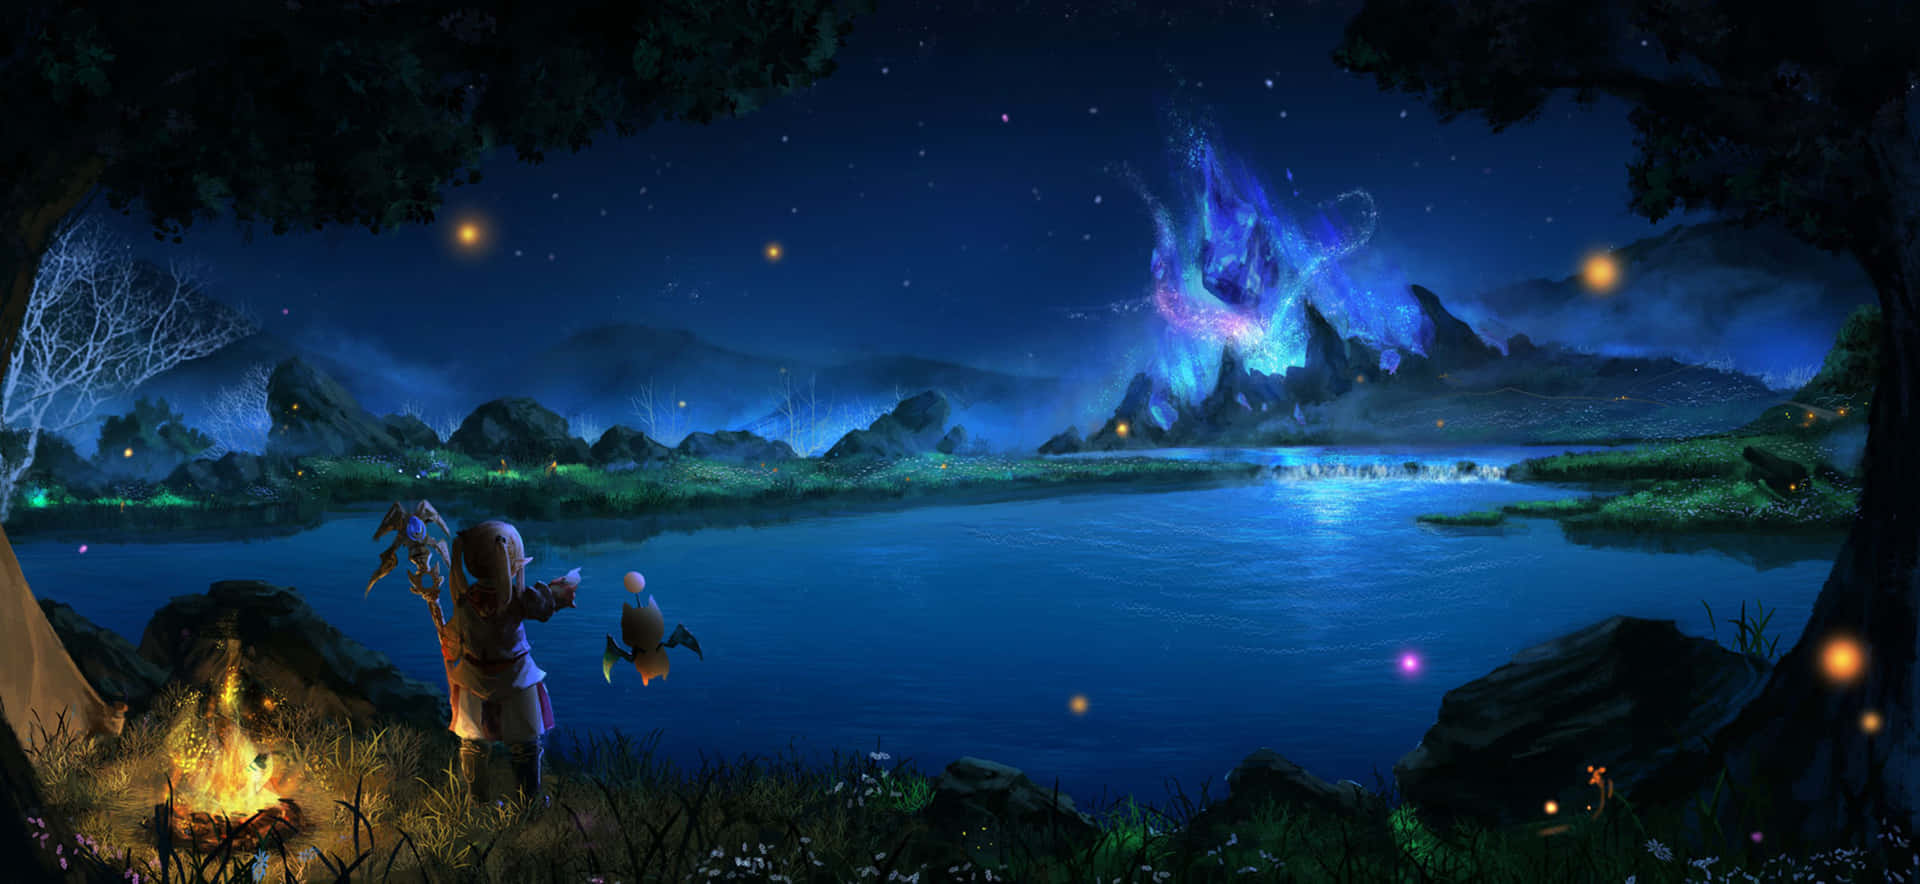 Campfire By The Lake Final Fantasy Xiv Background